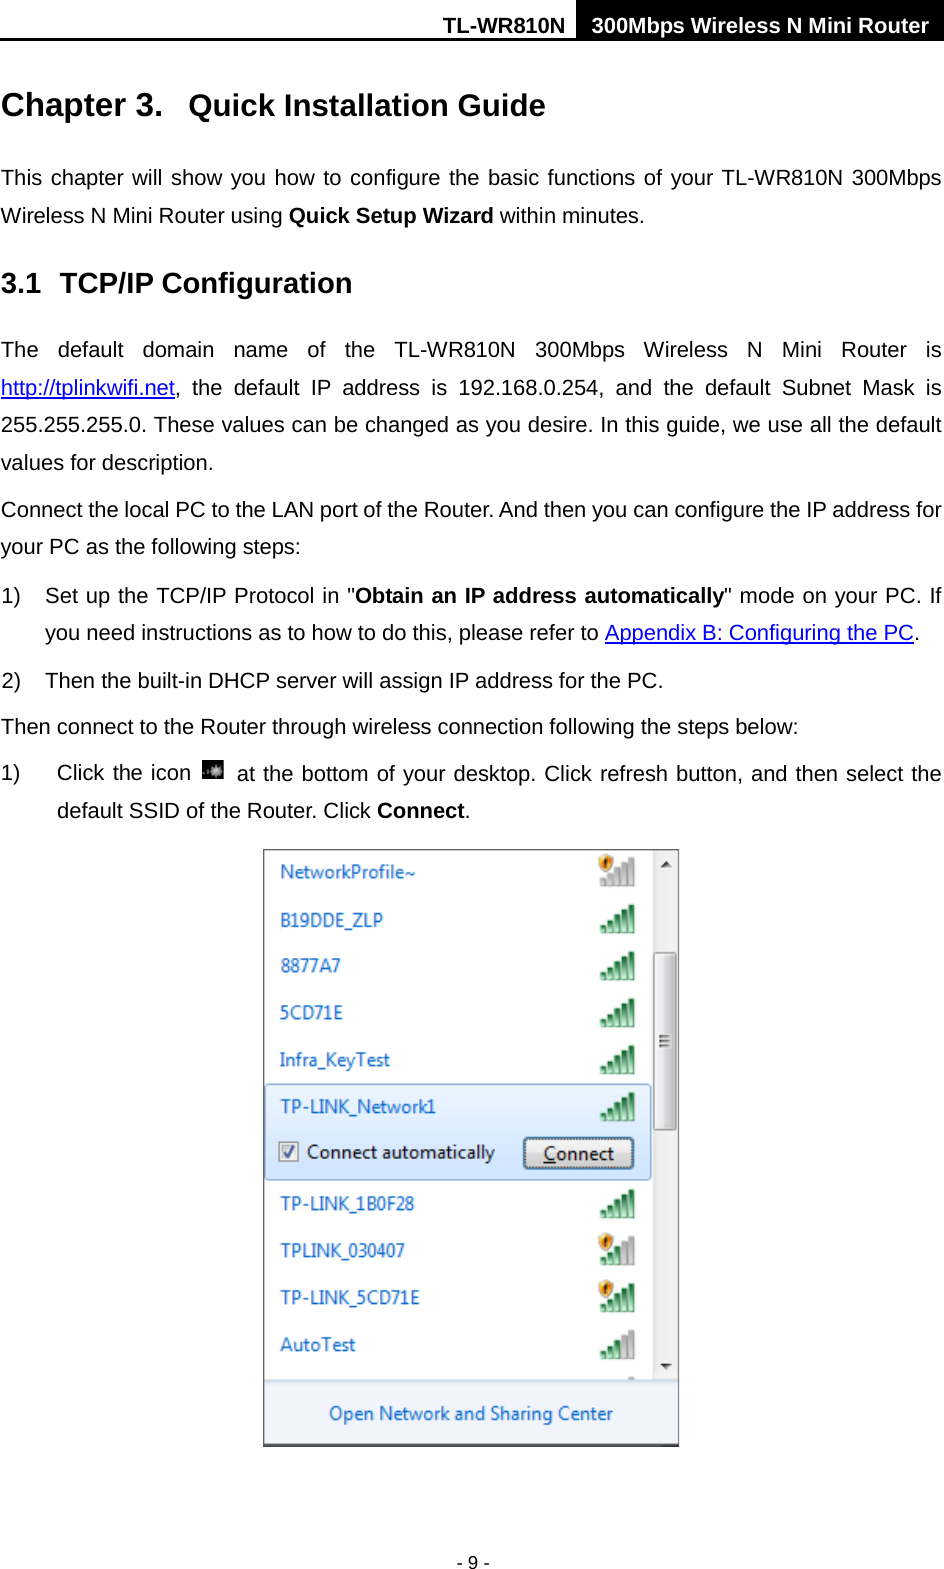 TL-WR810N 300Mbps Wireless N Mini Router  - 9 - Chapter 3.  Quick Installation Guide This chapter will show you how to configure the basic functions of your TL-WR810N 300Mbps Wireless N Mini Router using Quick Setup Wizard within minutes. 3.1 TCP/IP Configuration The  default domain name of the TL-WR810N 300Mbps Wireless N Mini Router is http://tplinkwifi.net, the default IP address is 192.168.0.254, and the default Subnet Mask is 255.255.255.0. These values can be changed as you desire. In this guide, we use all the default values for description. Connect the local PC to the LAN port of the Router. And then you can configure the IP address for your PC as the following steps: 1) Set up the TCP/IP Protocol in &quot;Obtain an IP address automatically&quot; mode on your PC. If you need instructions as to how to do this, please refer to Appendix B: Configuring the PC. 2) Then the built-in DHCP server will assign IP address for the PC. Then connect to the Router through wireless connection following the steps below: 1) Click the icon   at the bottom of your desktop. Click refresh button, and then select the default SSID of the Router. Click Connect.    